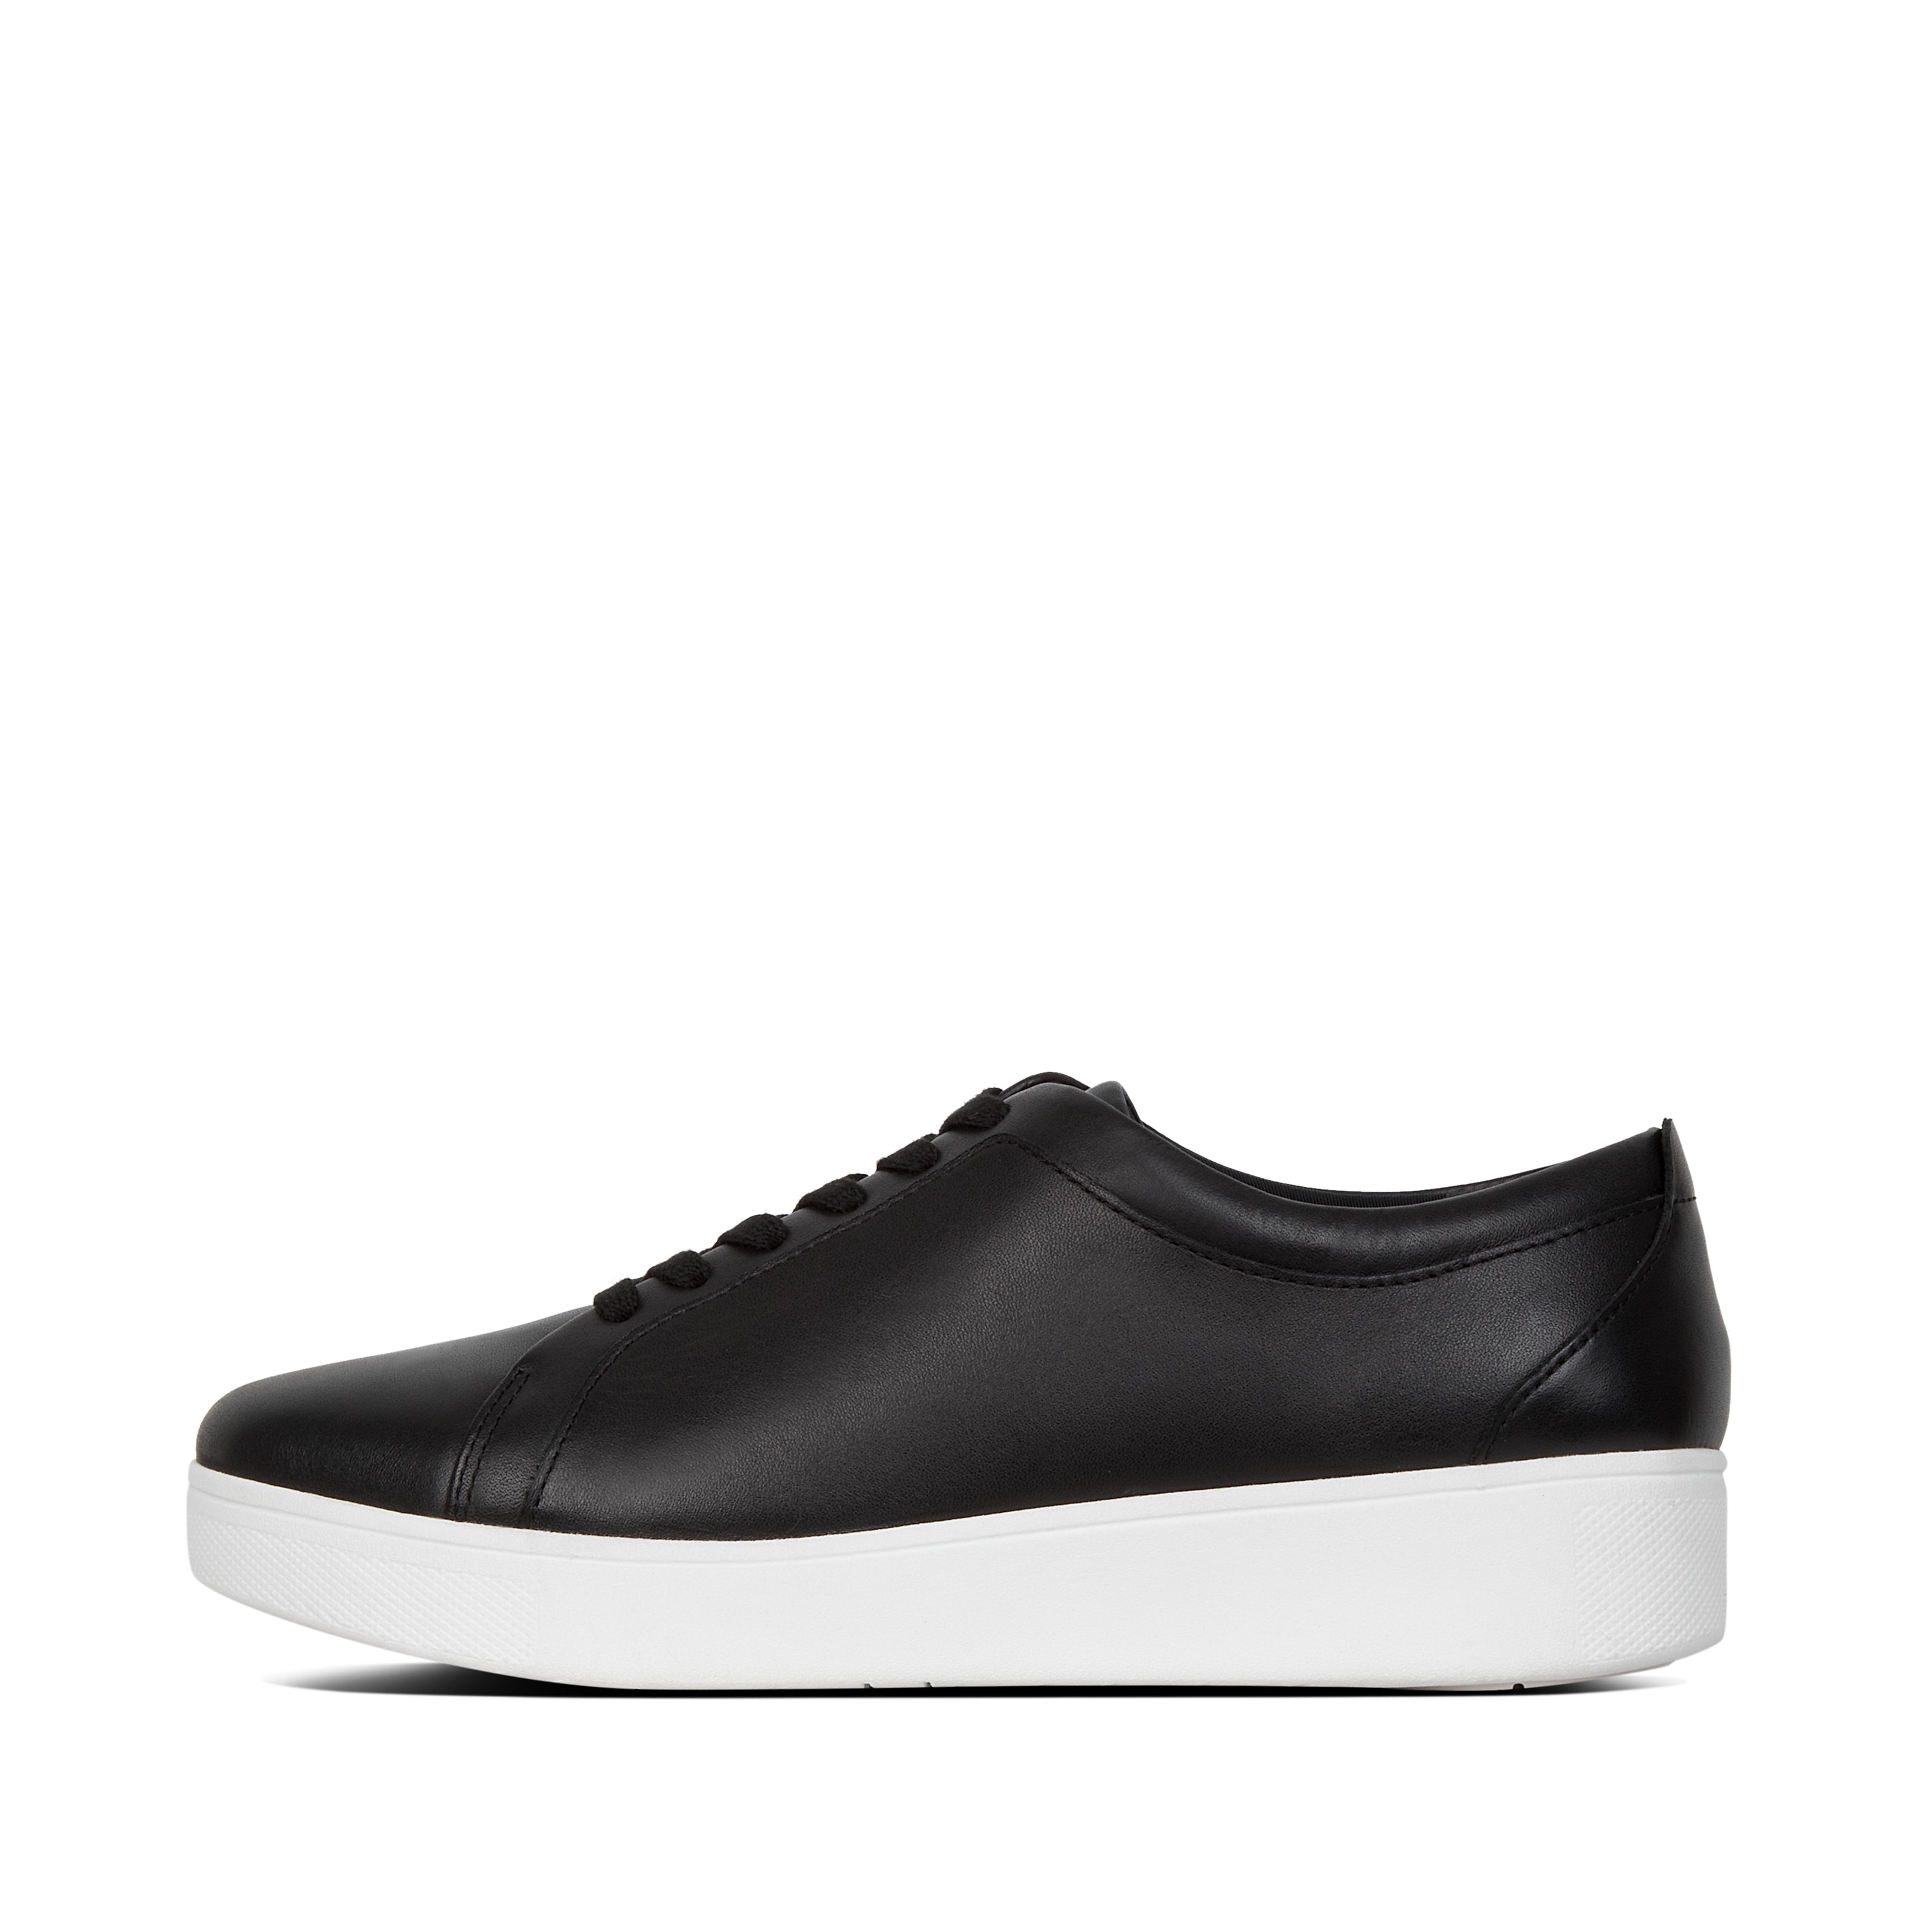 all black leather tennis shoes womens